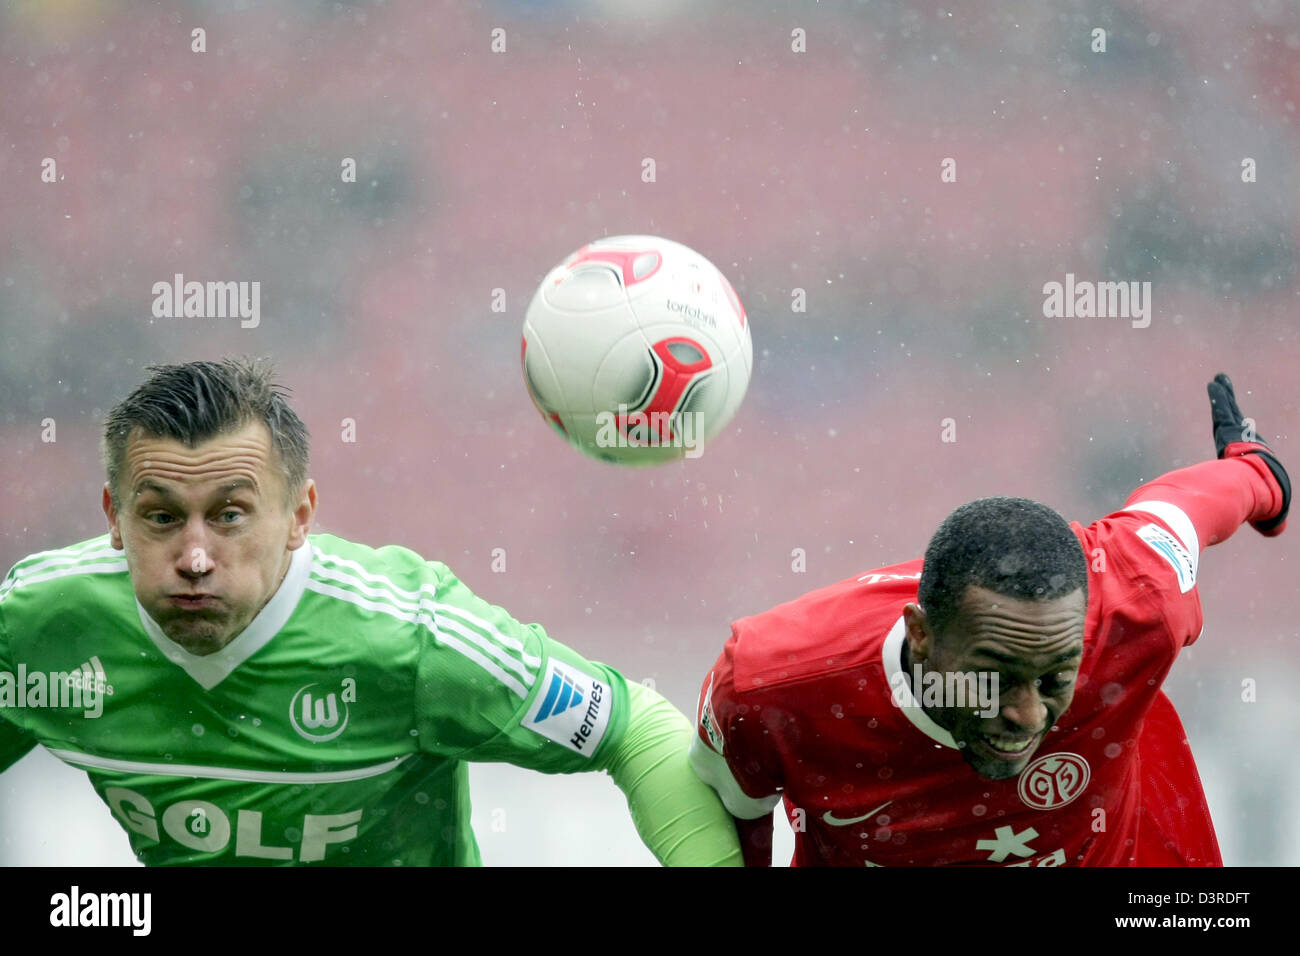 Mainz's Junior Diaz (R) and Wolfsburg's Ivica Olic vie for the ball during the Bundesliga soccer match between FSV Mainz 05 and VfL Wolfsburg at Coface Arena in Mainz, Germany, 23 February 2013. The match ended 1-1 undecided. Photo: FREDRIK VON ERICHSEN  (ATTENTION: EMBARGO CONDITIONS! The DFL permits the further  utilisation of up to 15 pictures only (no sequntial pictures or video-similar series of pictures allowed) via the internet and online media during the match (including halftime), taken from inside the stadium and/or prior to the start of the match. The DFL permits the unrestricted tr Stock Photo